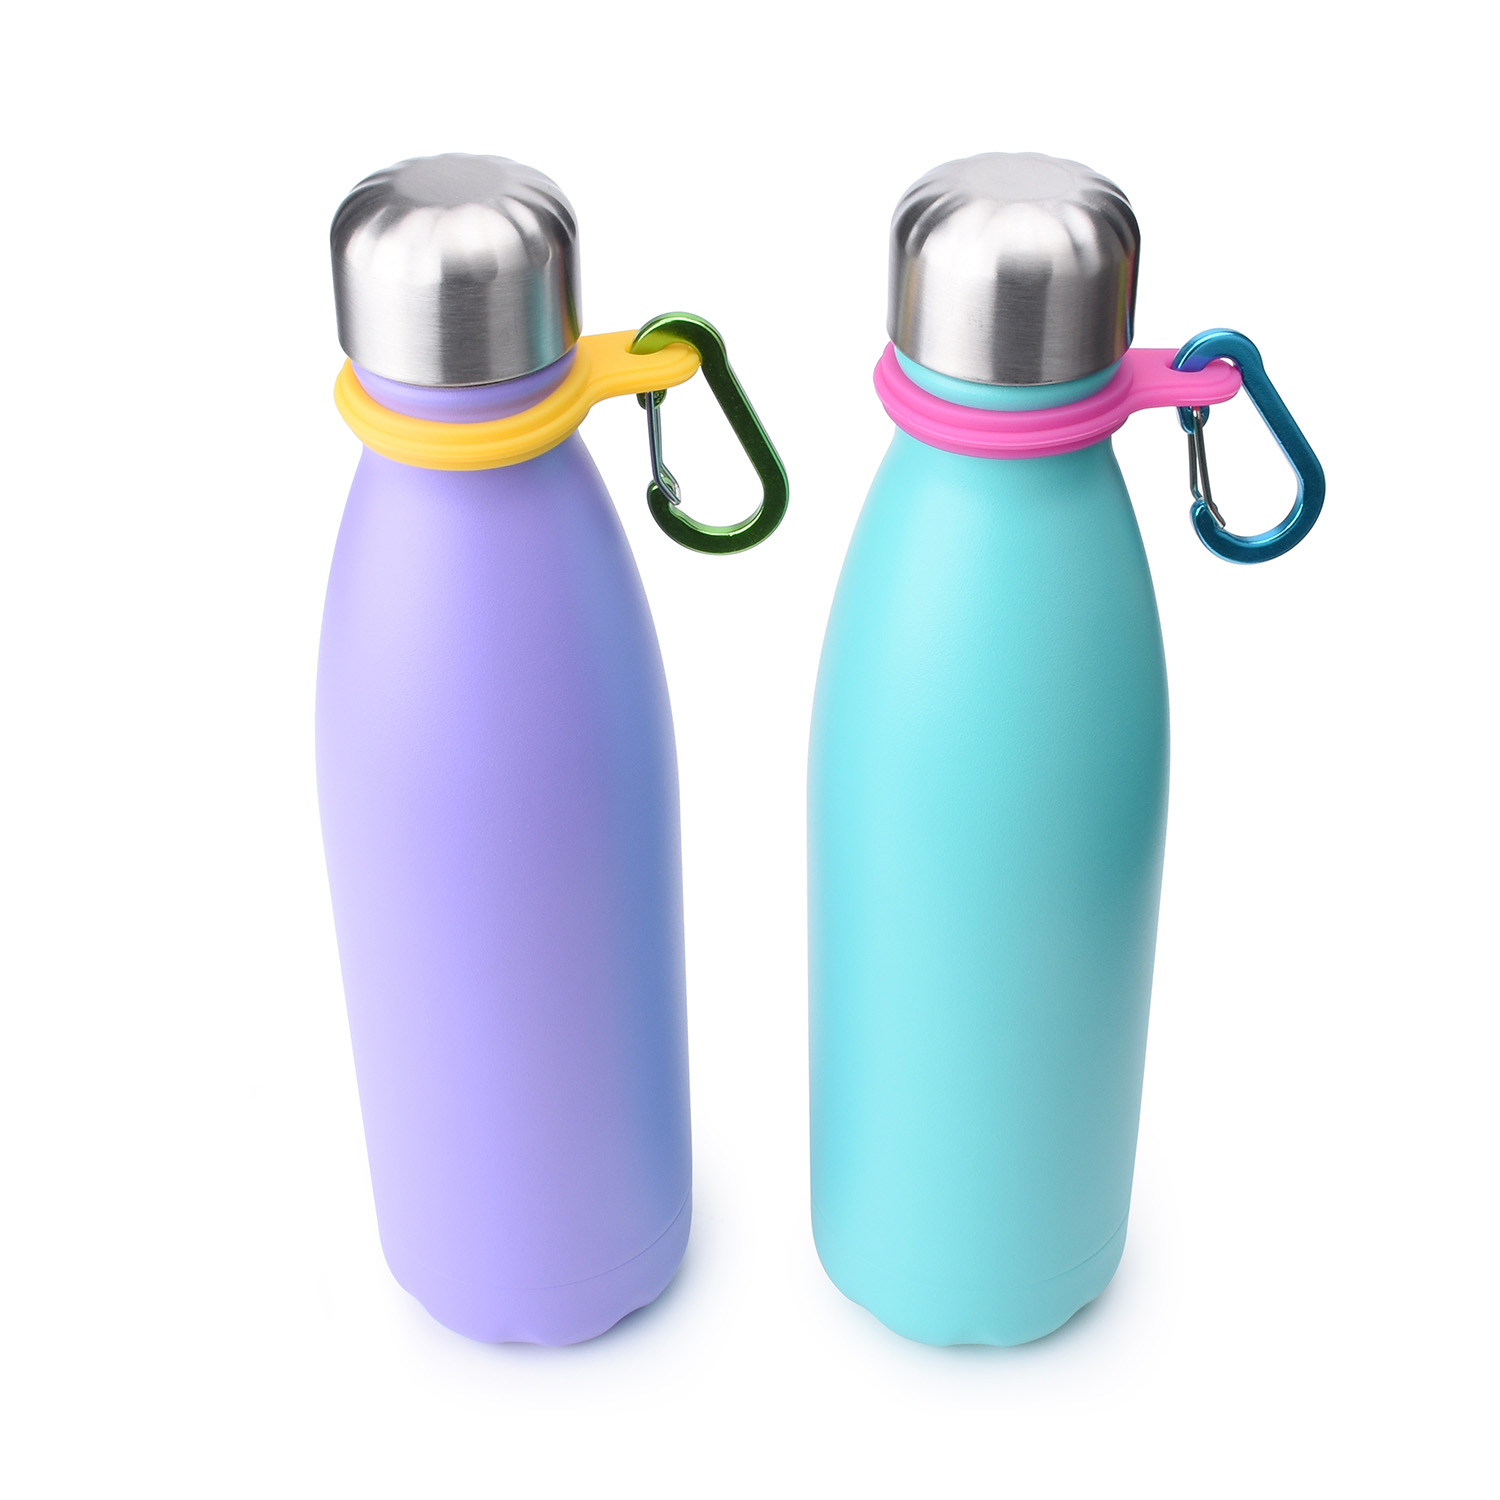 Custom Insulated Water Bottle Slings - Two Colors